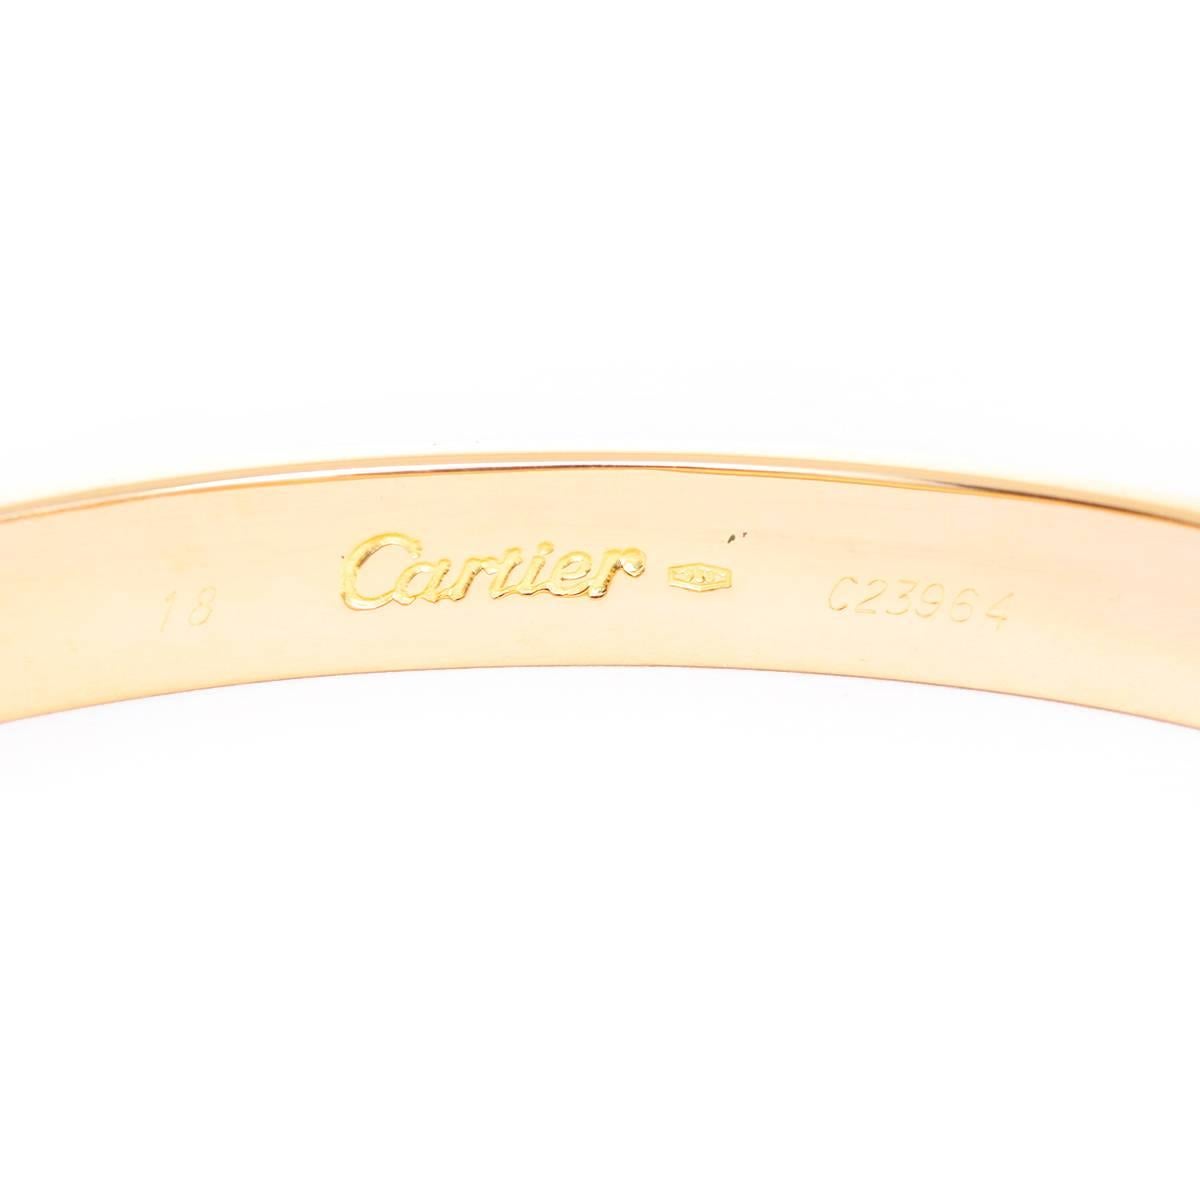 Cartier Love Bracelet 18k Yellow Gold Size 18 with Screwdriver - This beautiful bracelet is stamped Cartier, 18, 750  and C23964.  This is a great piece for everyday as well as dress. Authenticity guaranteed. Like new condition with no dings or